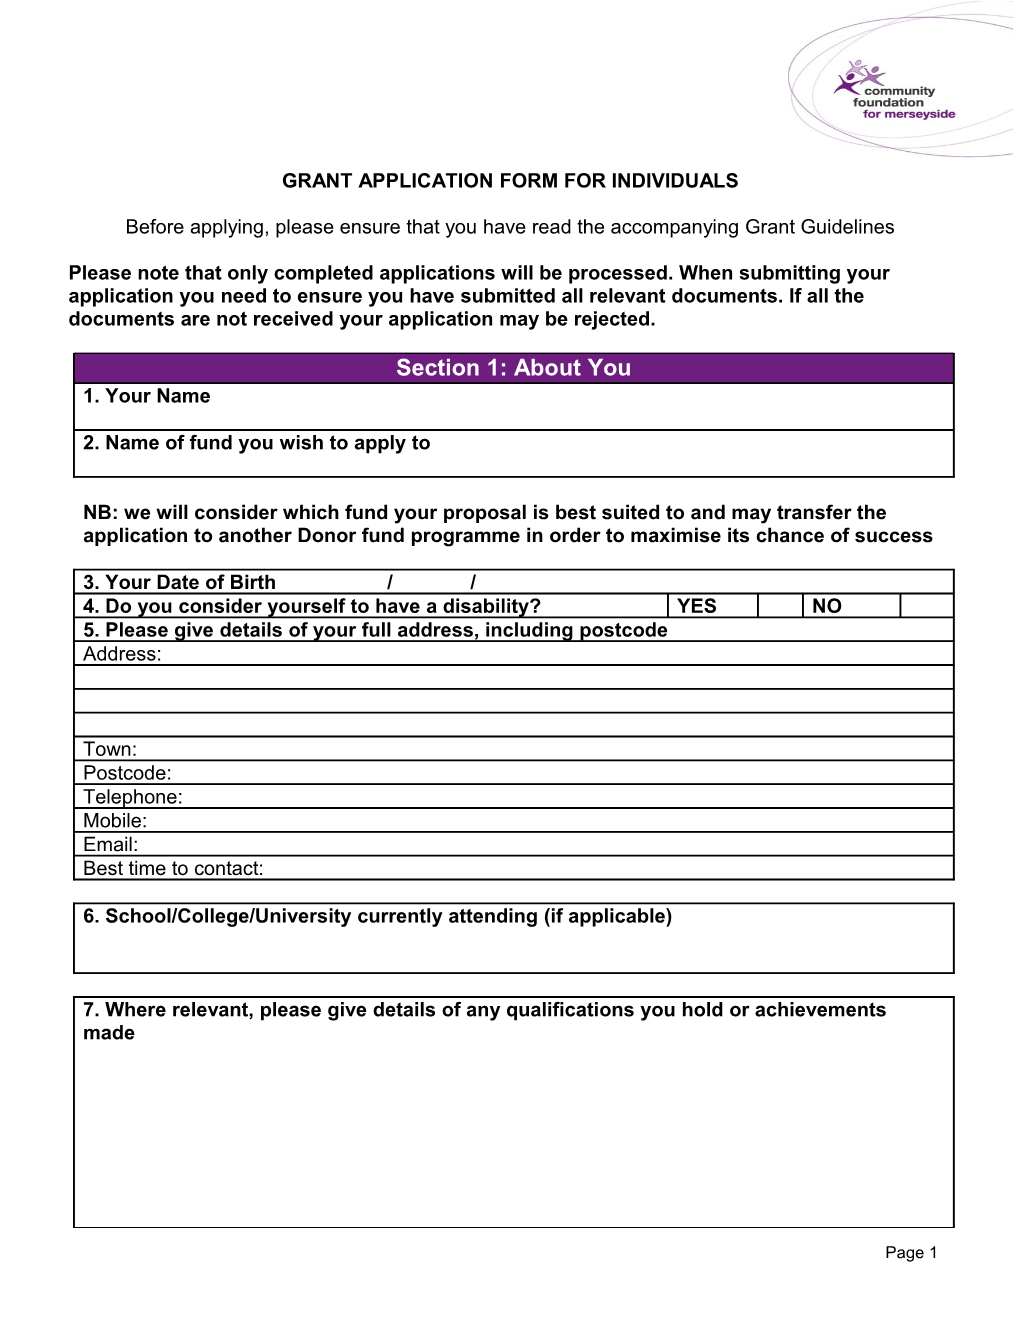 Grant Application Form for Individuals